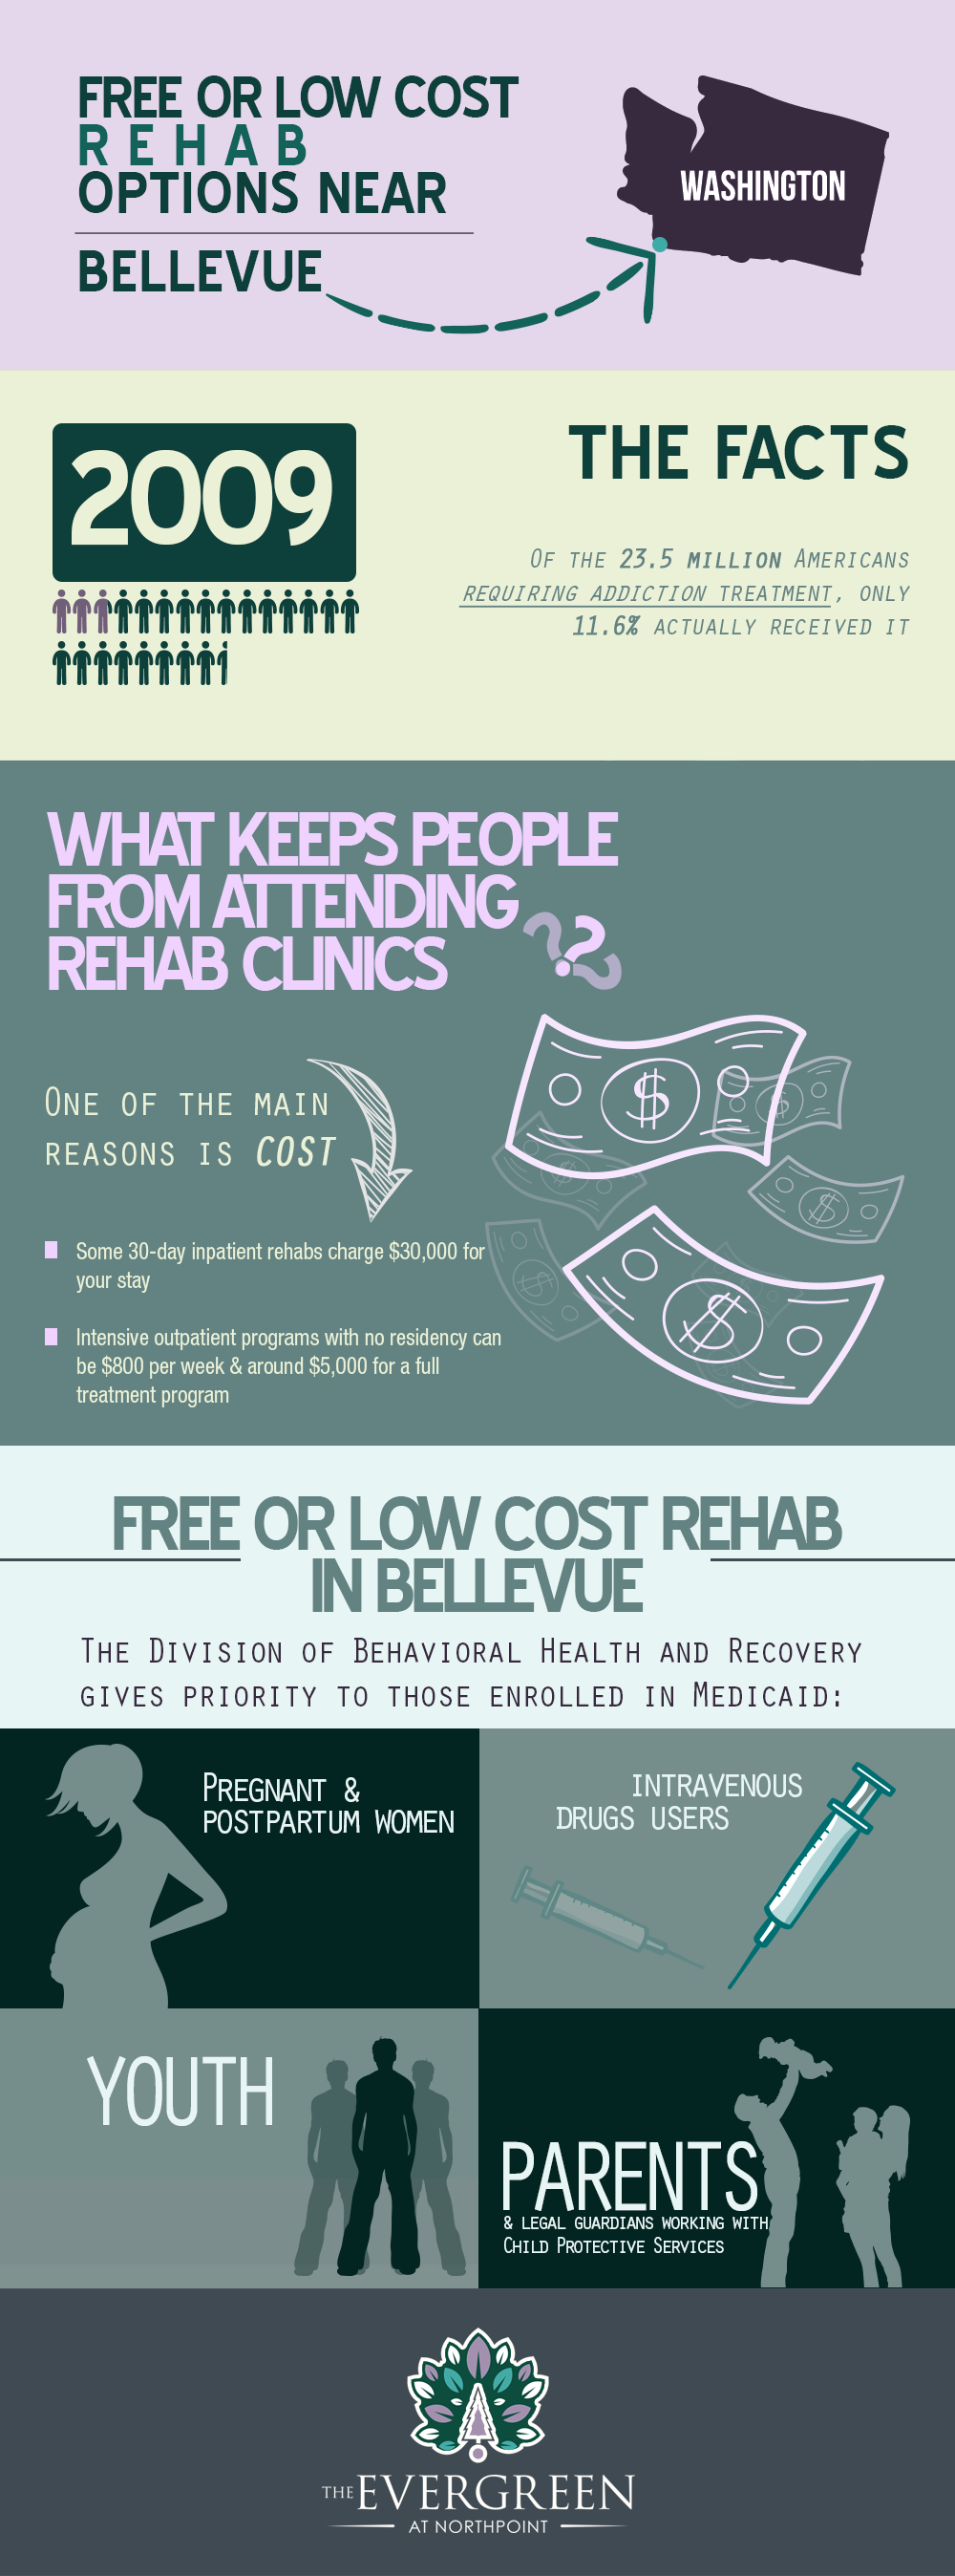 Free or Low Cost Rehab Options near Bellevue